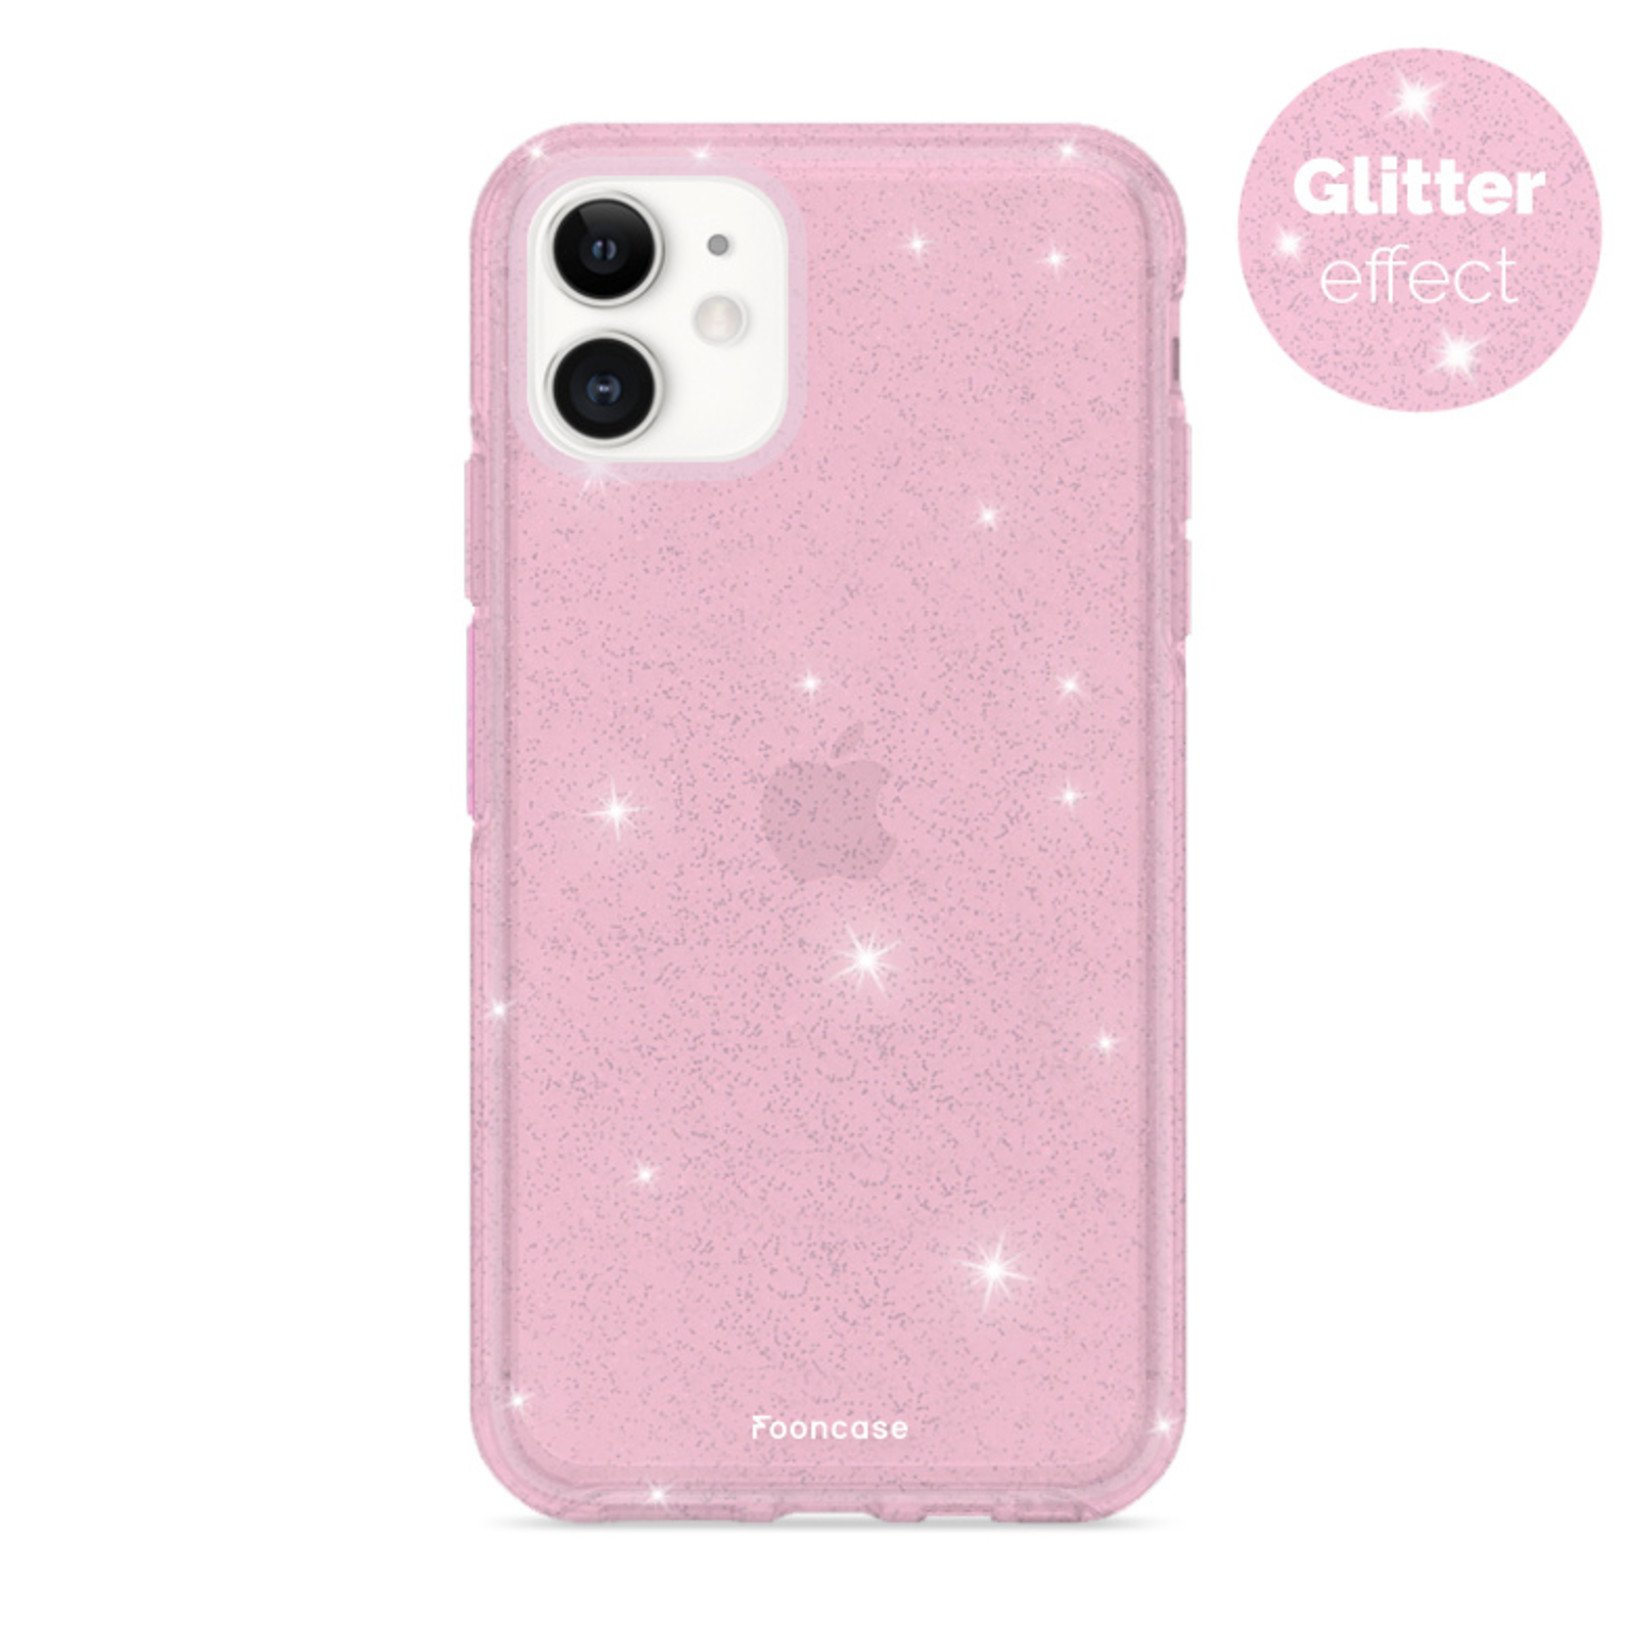 FOONCASE IPhone 11 Handyhülle - Glamour Pink (Glitters)